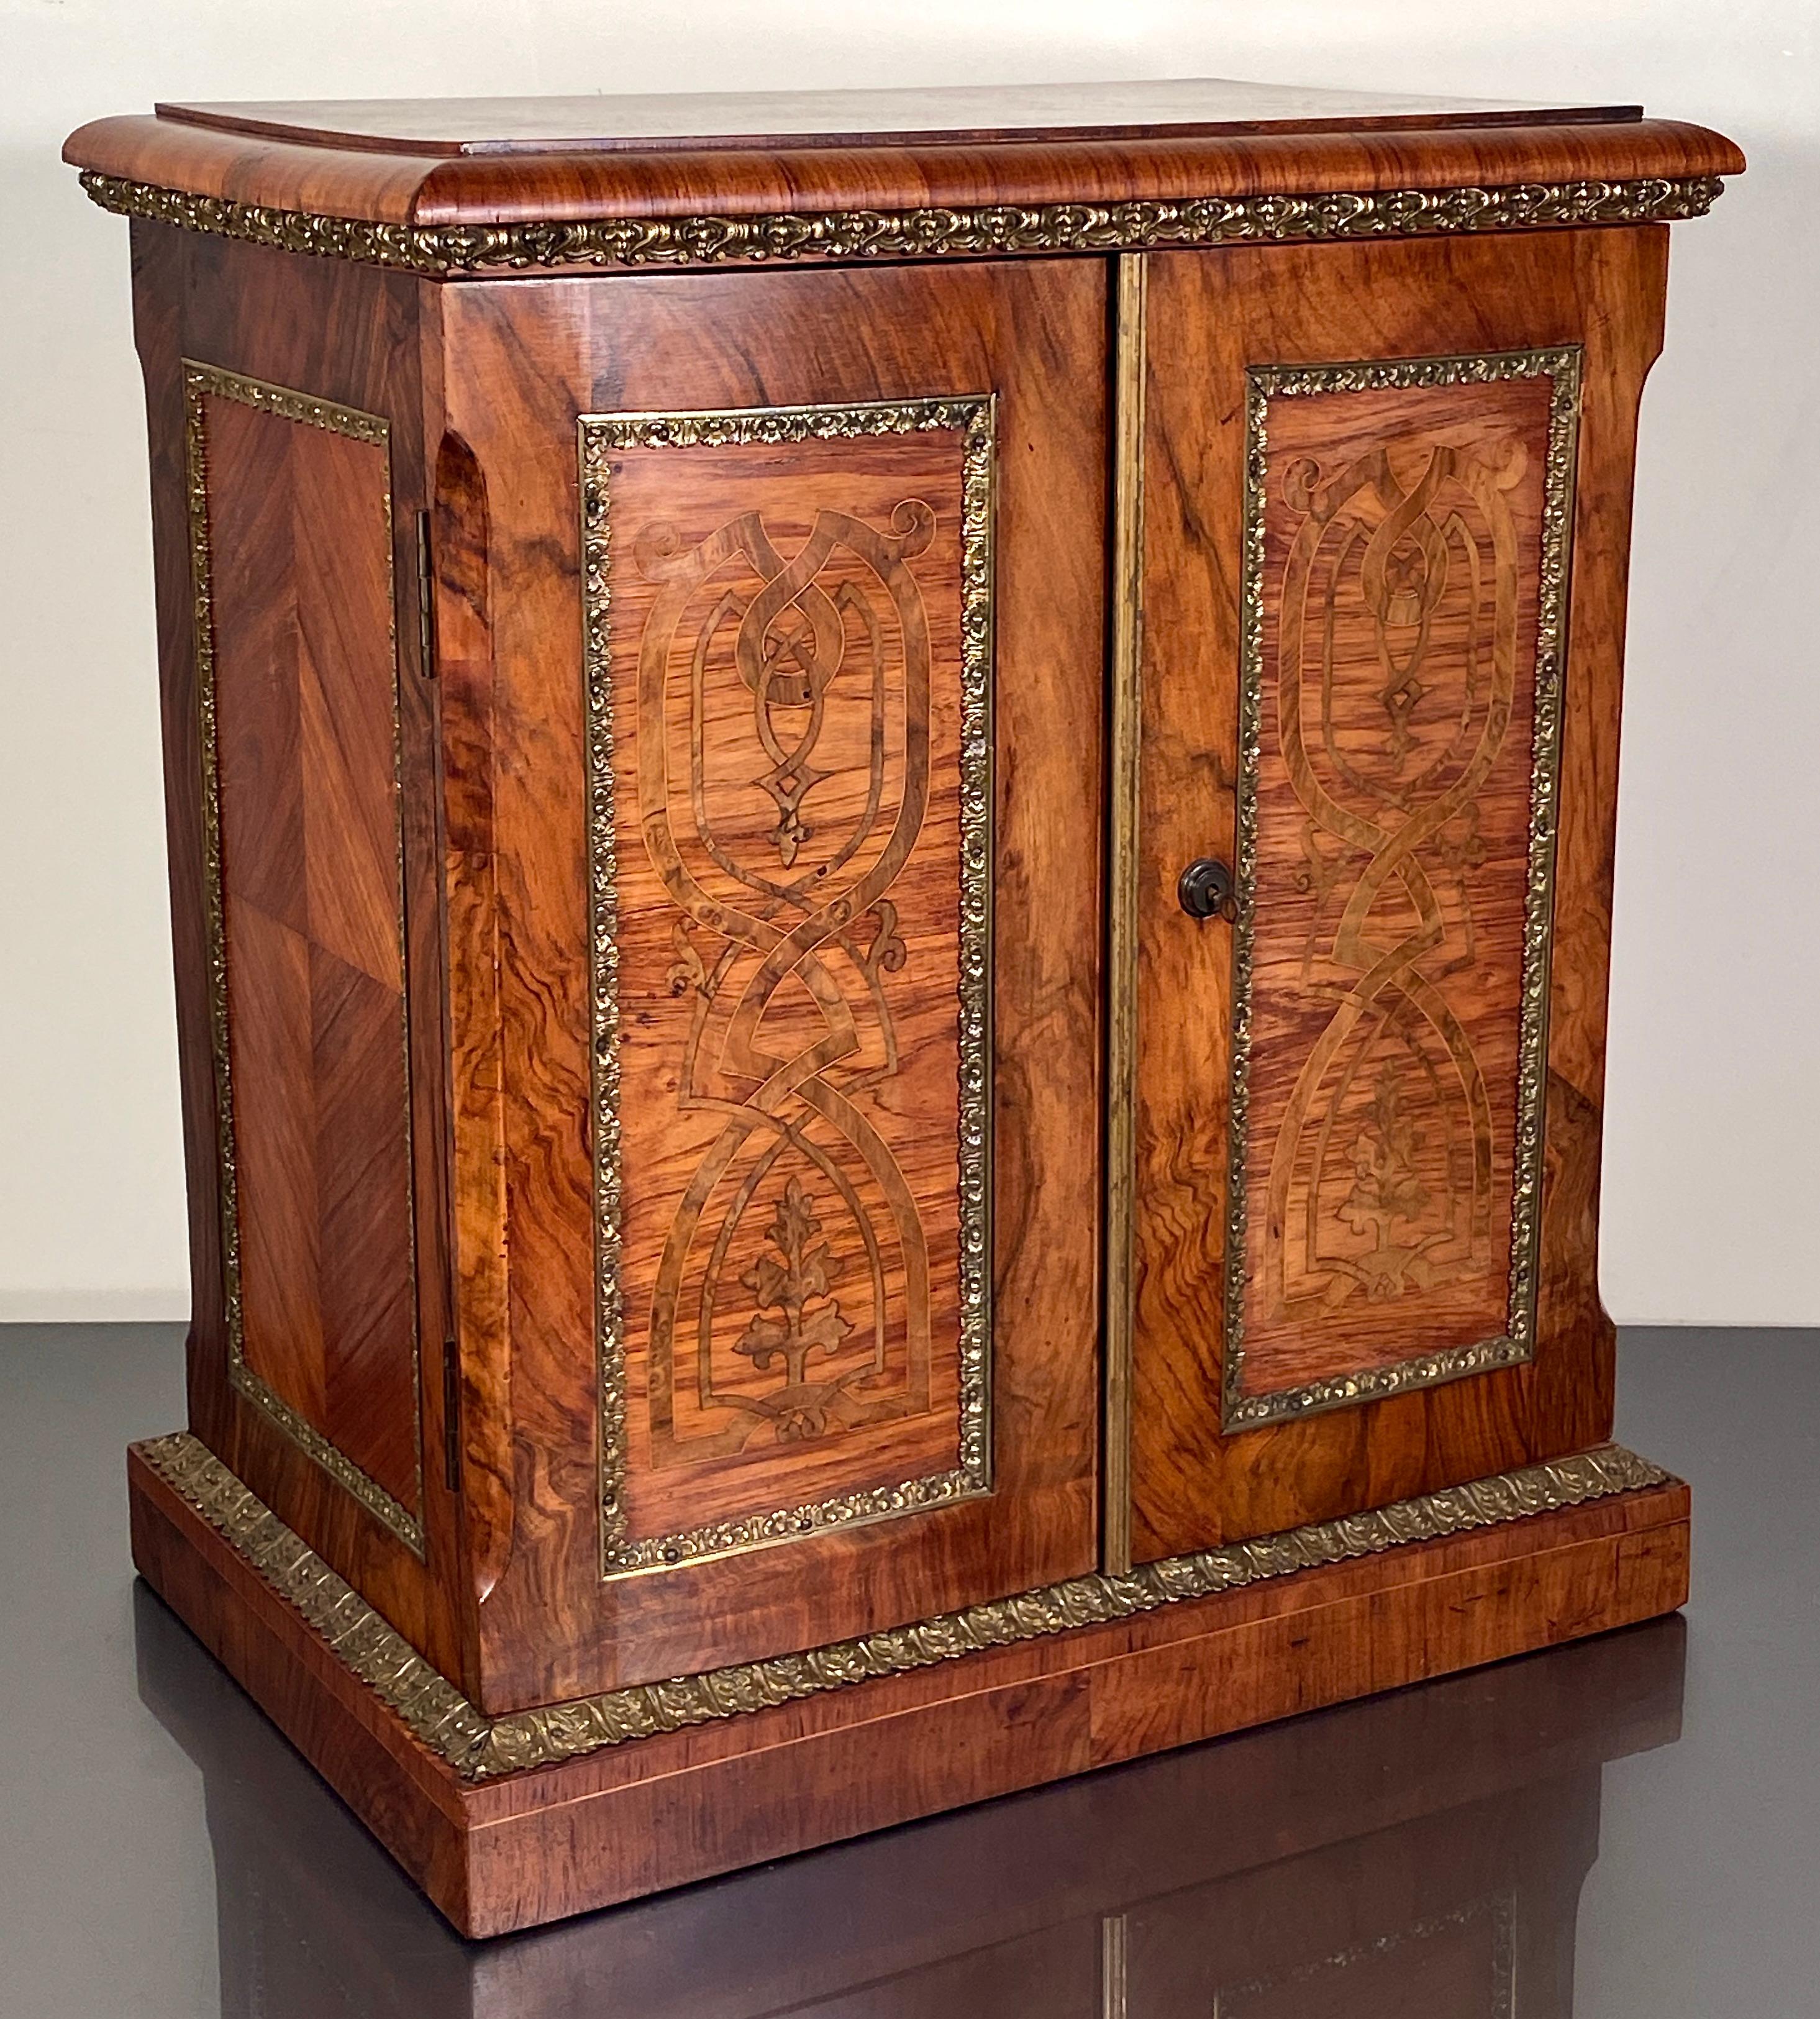 Collectors cabinet burr walnut ormolu specimen jewelry

Burr walnut and ormolu mounted specimen collectors cabinet.

Marquetry inlaid paneled doors enclosing 7 drawers with adjustable sections, original handles, Bramah lock and brass hinges.

The